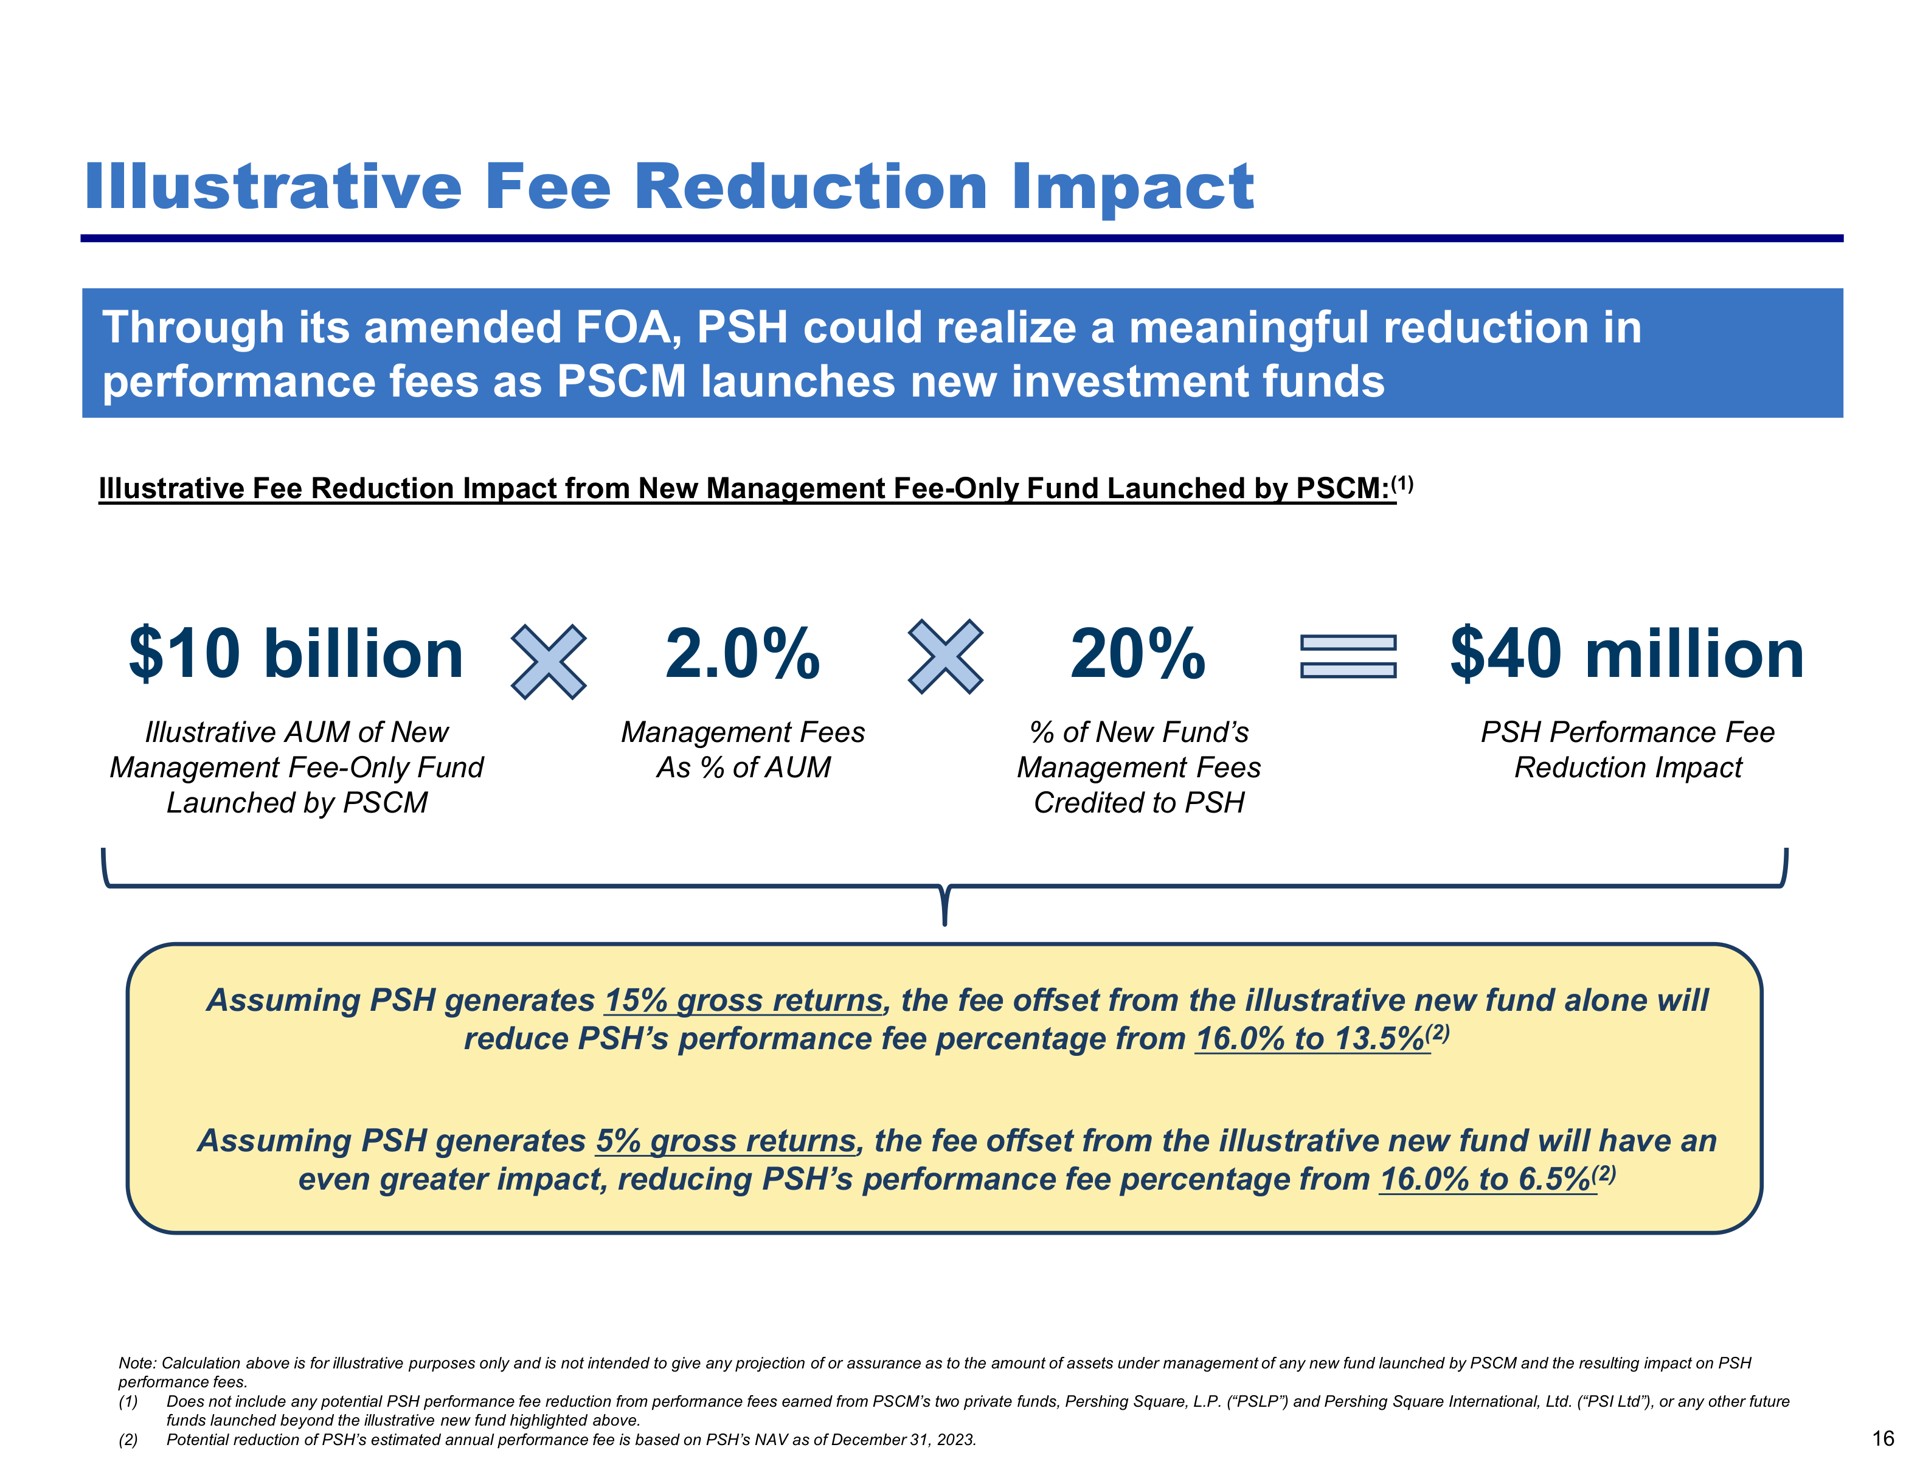 illustrative fee reduction impact through its amended could realize a meaningful reduction in performance fees as launches new investment funds billion million | Pershing Square